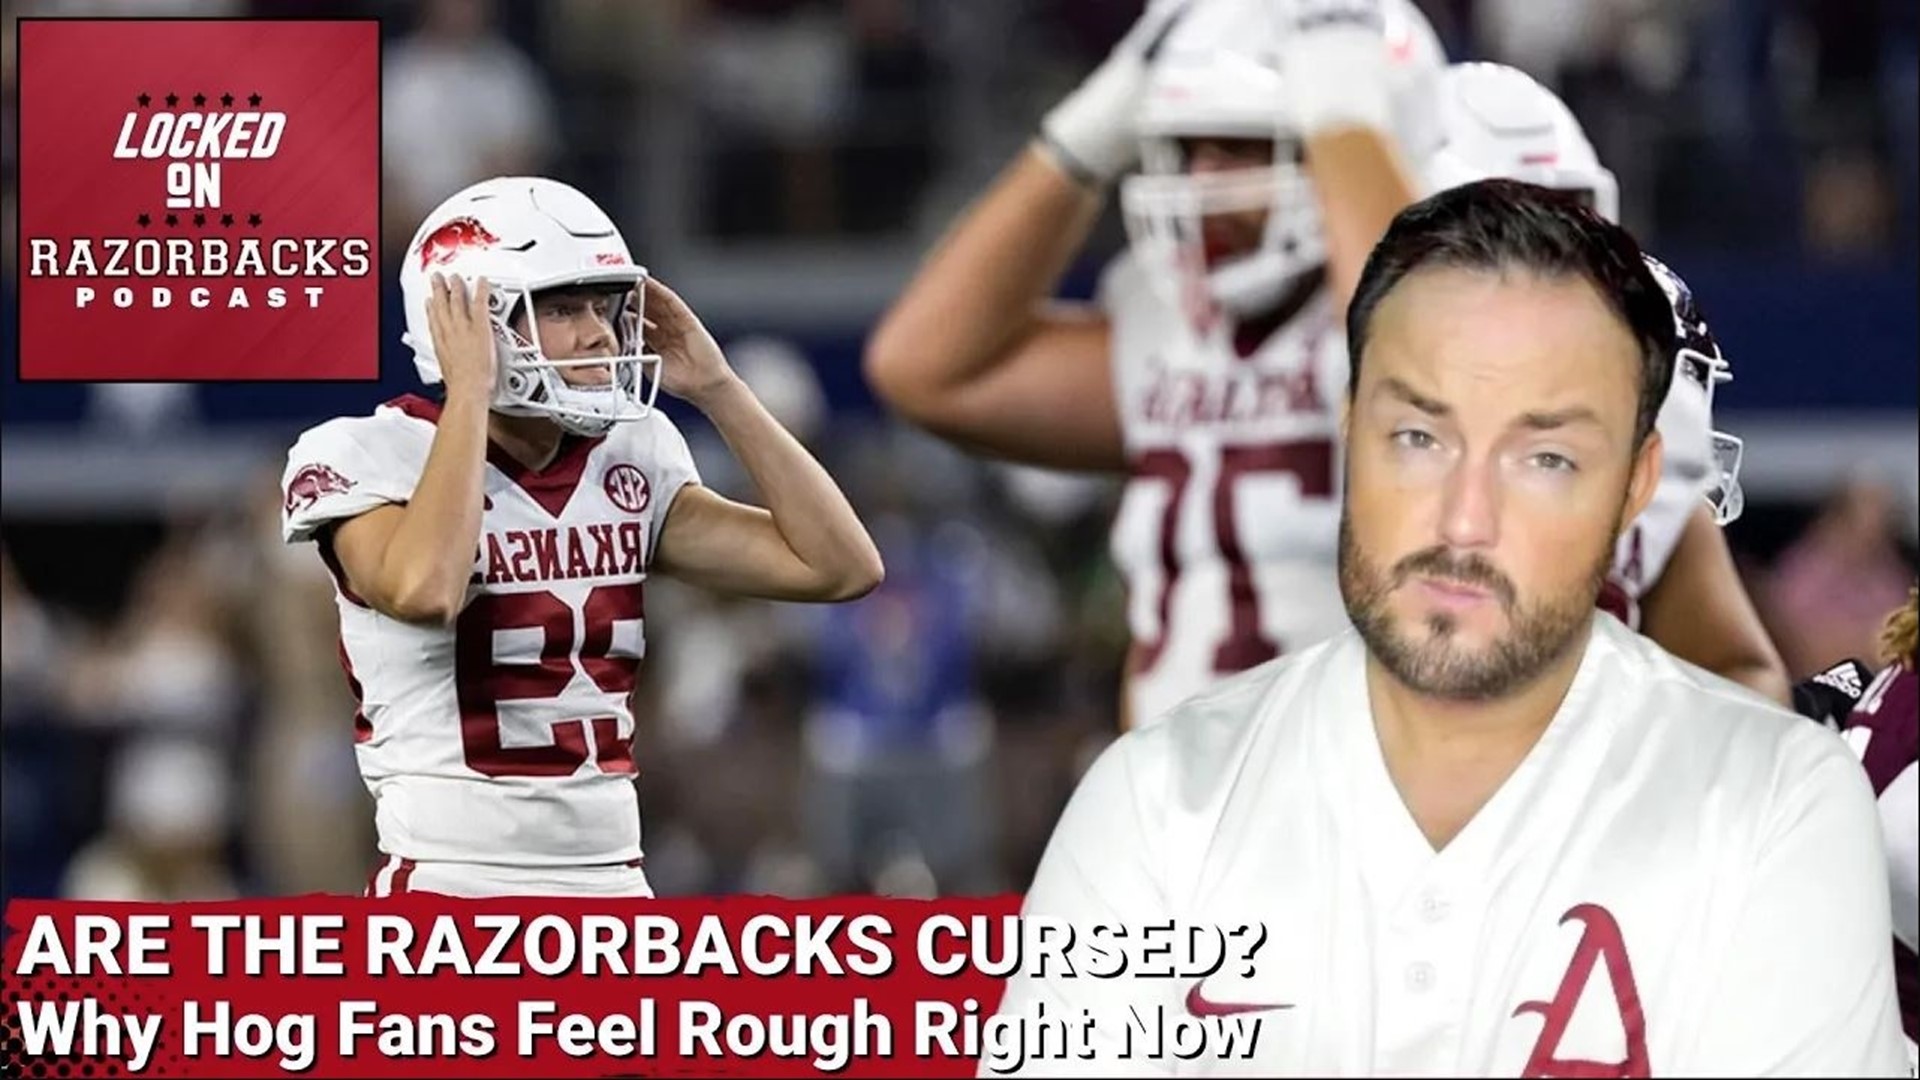 Razorback fans are feeling extremely cursed with the way things are going right now in major sports compared to last year. Do they have reasons to feel that way?